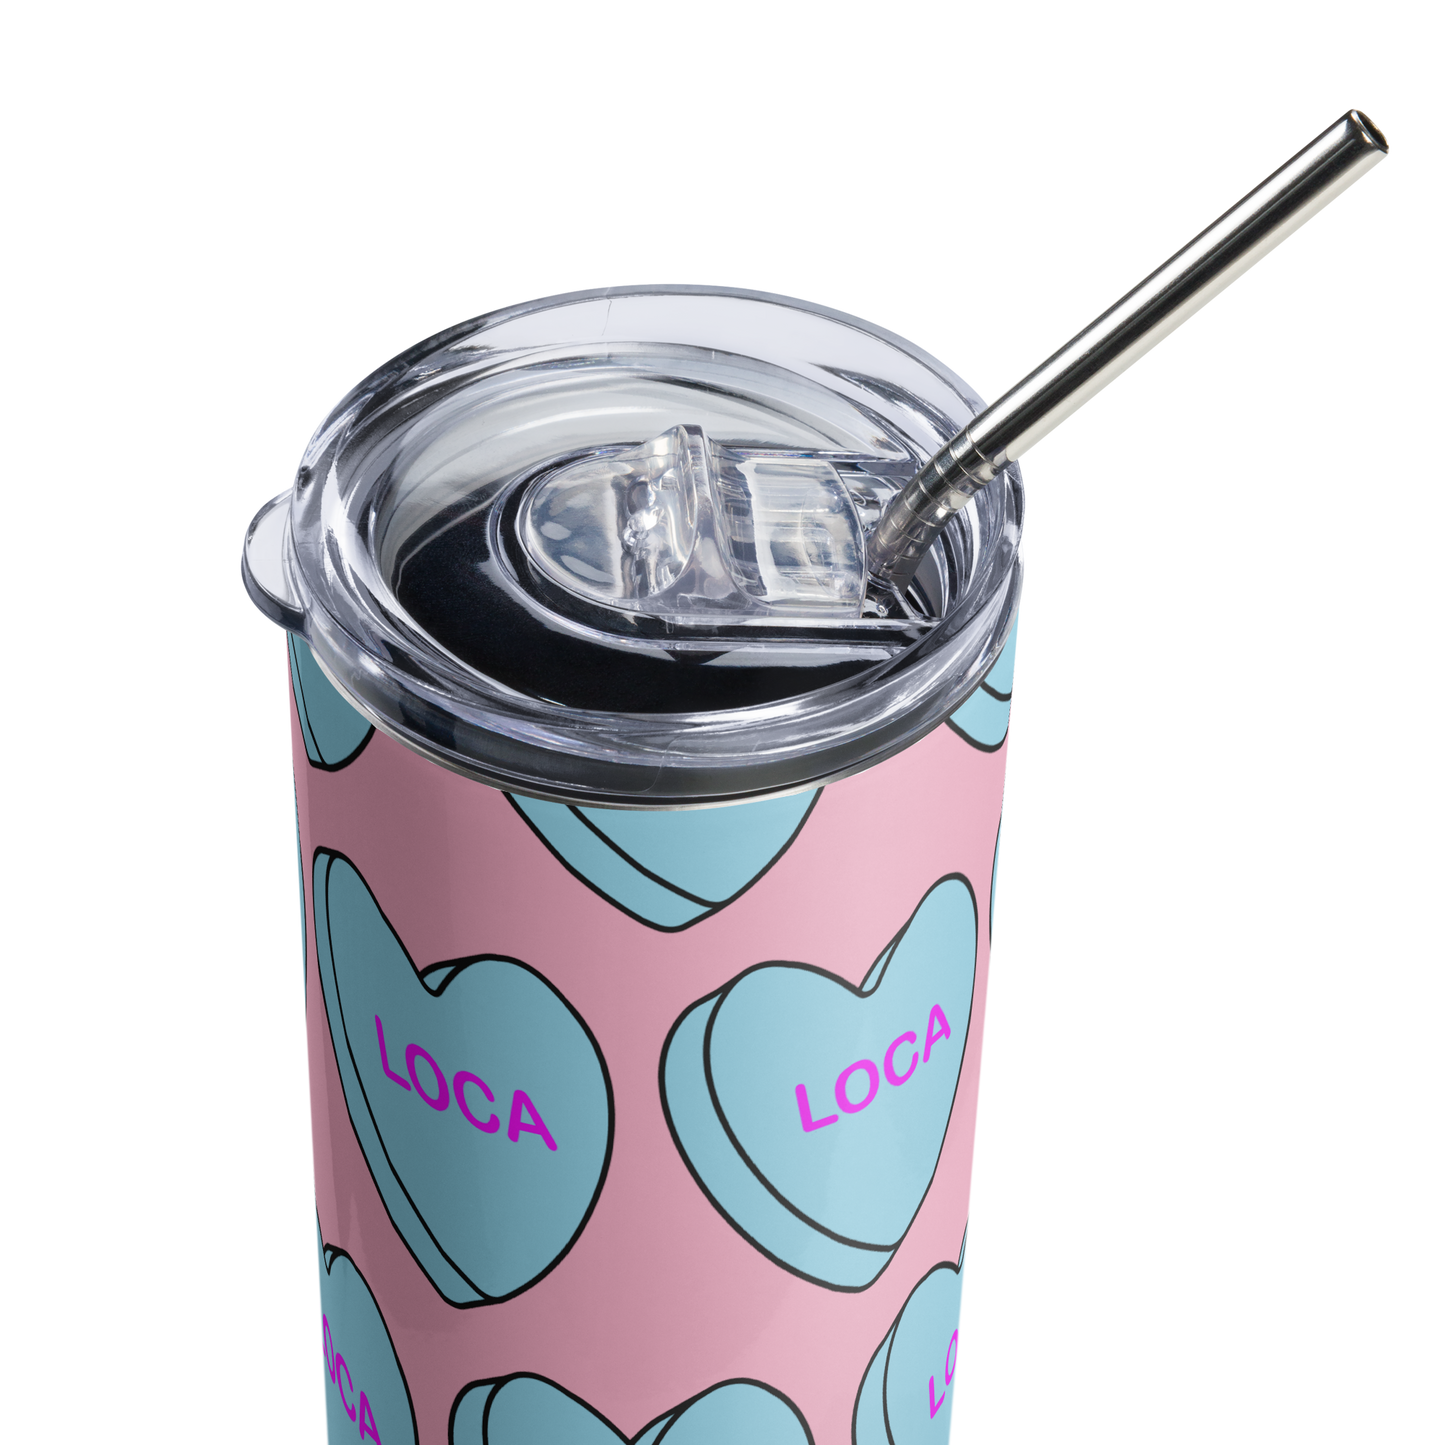 Loca Candy Conversation Heart - Stainless steel tumbler